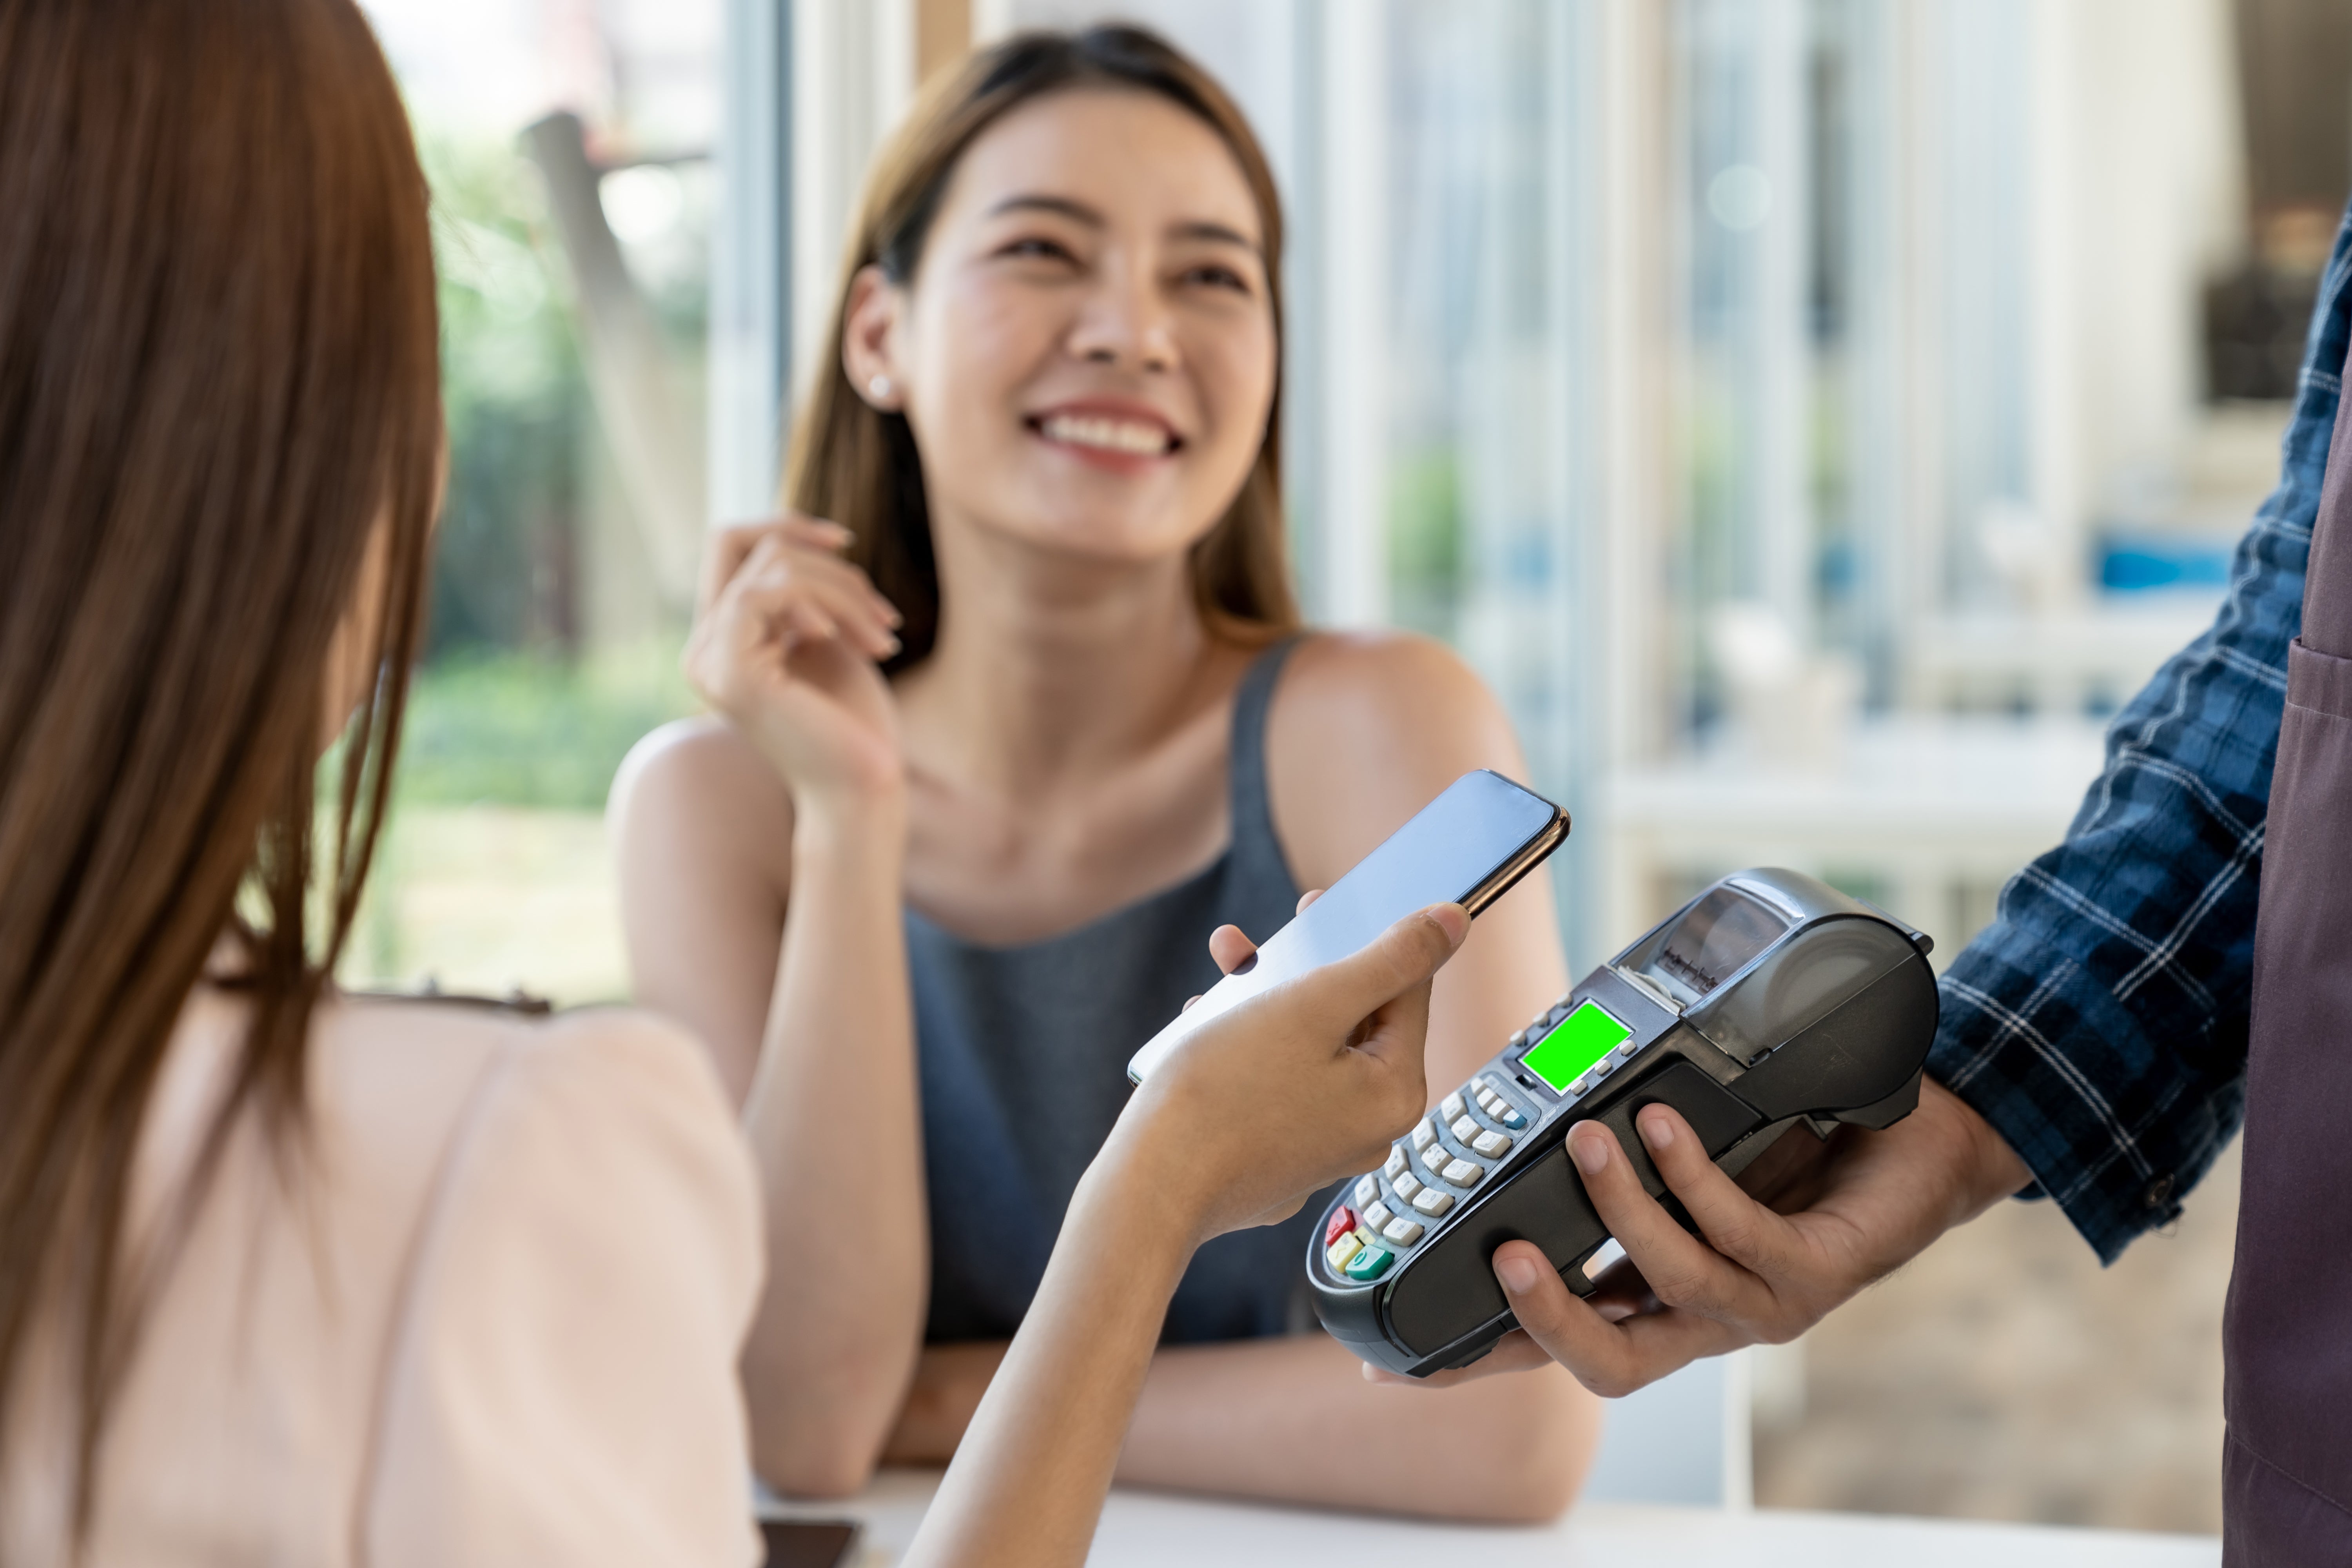 How Marketers Can Use Payments to Drive Loyalty Beyond Transactions